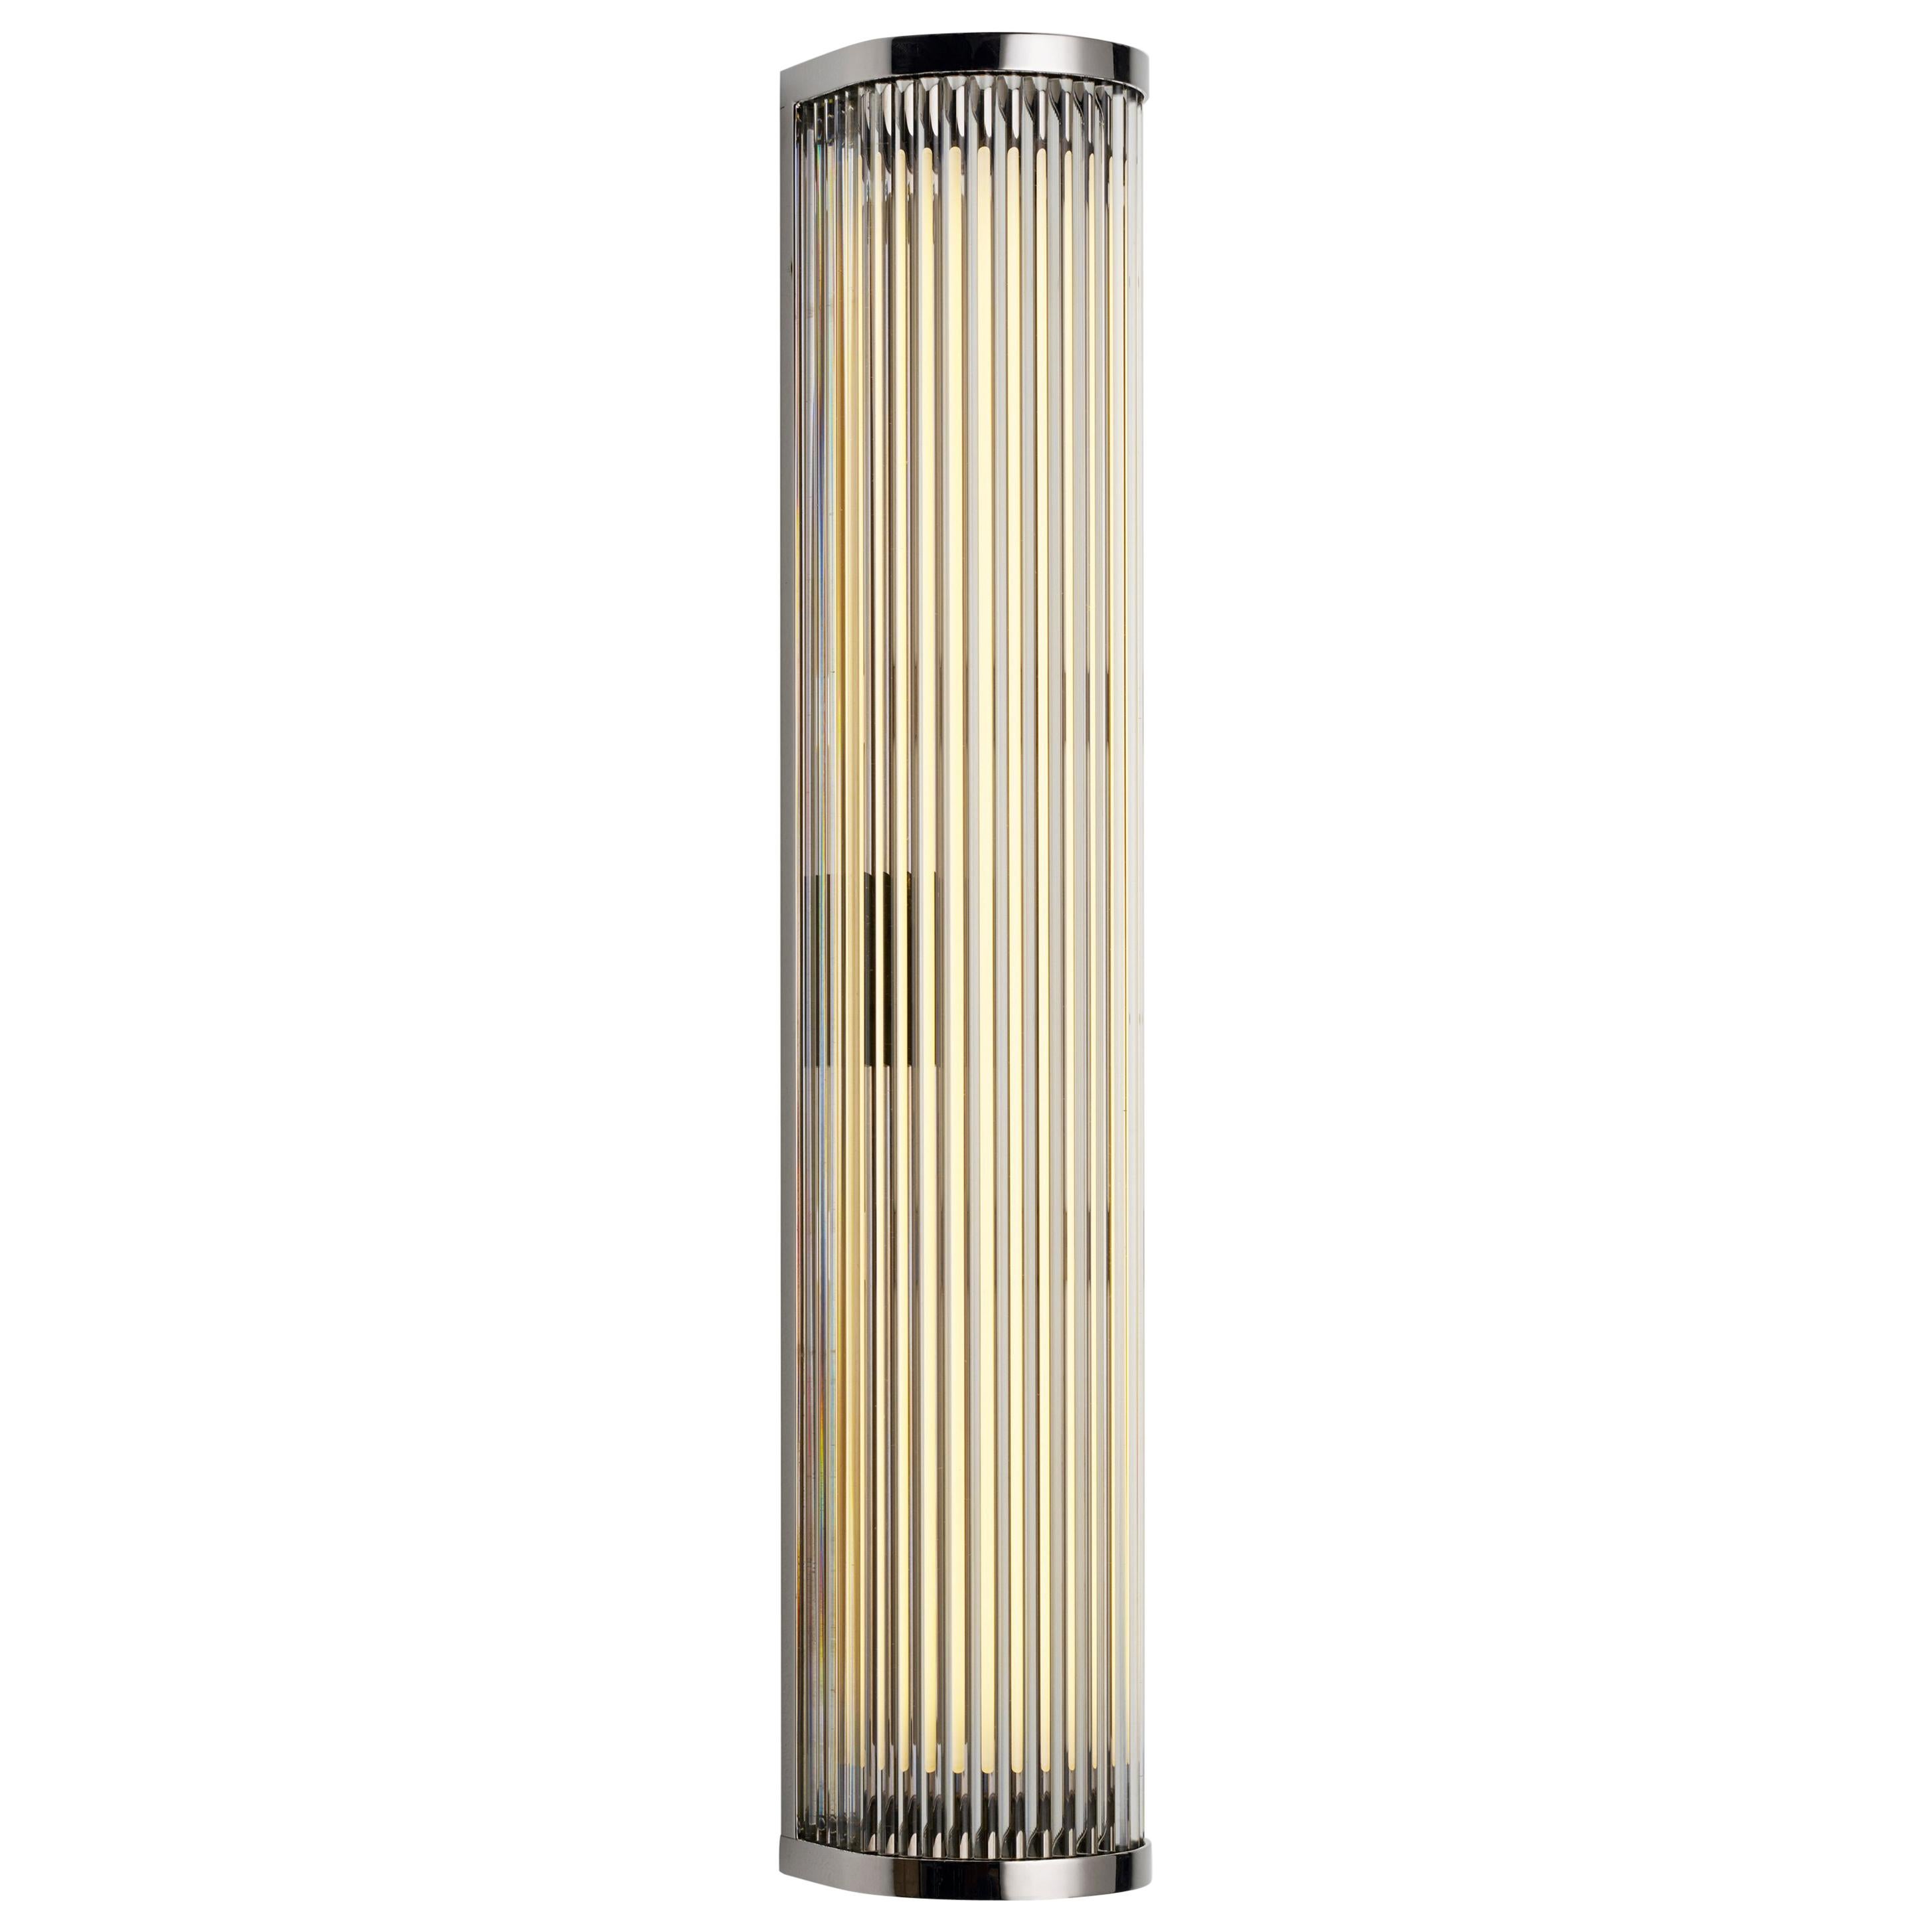 Tekna Stockles Vertical Wall Light with Polished Chrome Finish For Sale